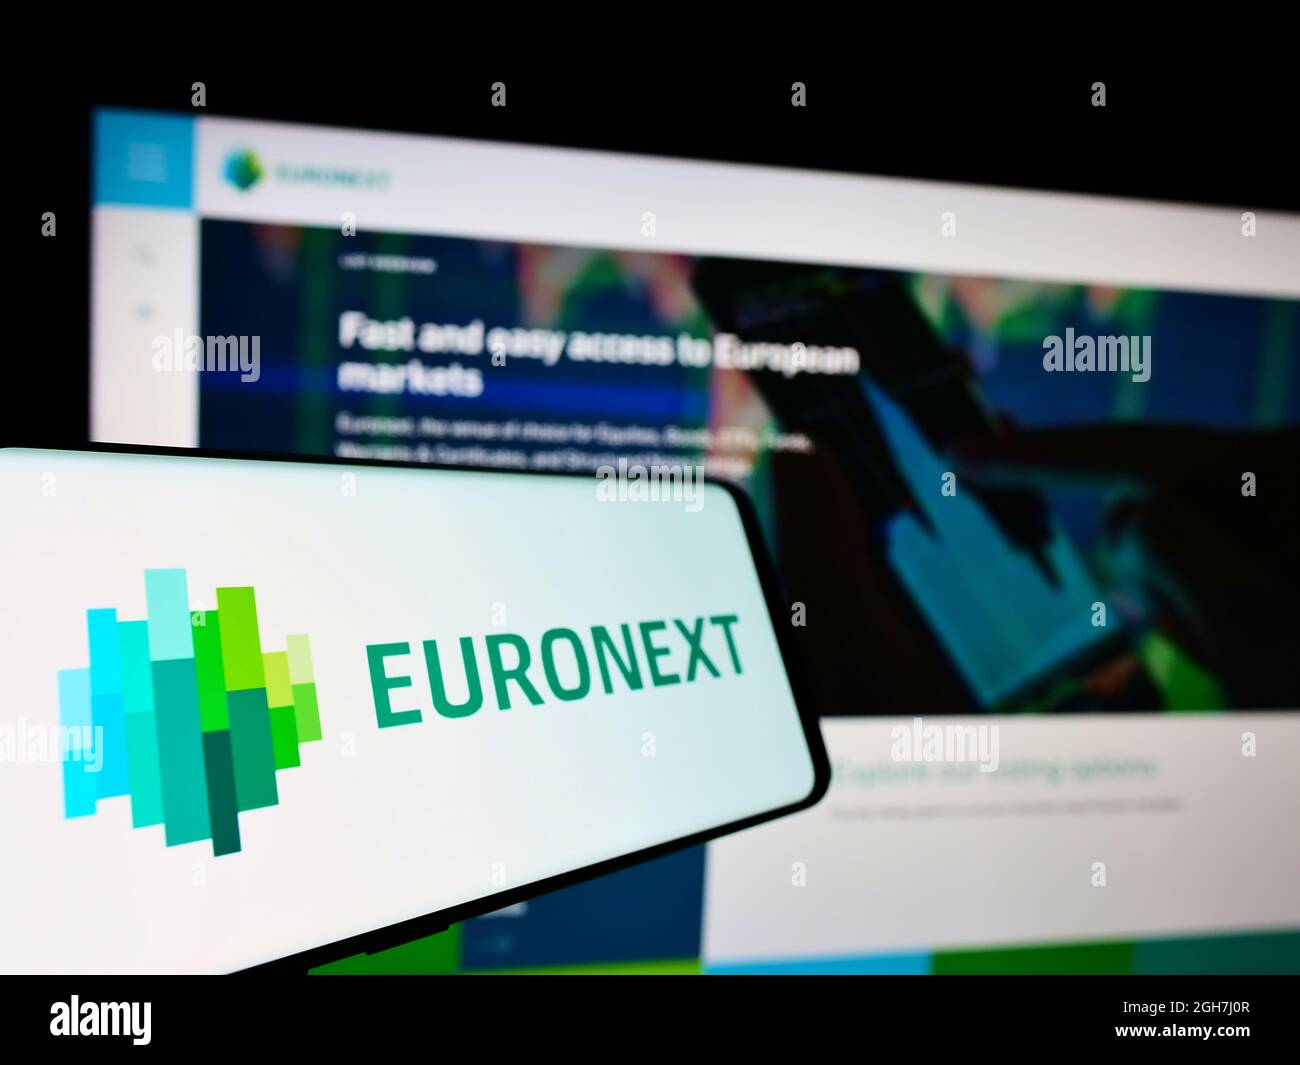 Cellphone with logo of financial services company Euronext N.V. on screen in front of business website. Focus on center-left of phone display. Stock Photo